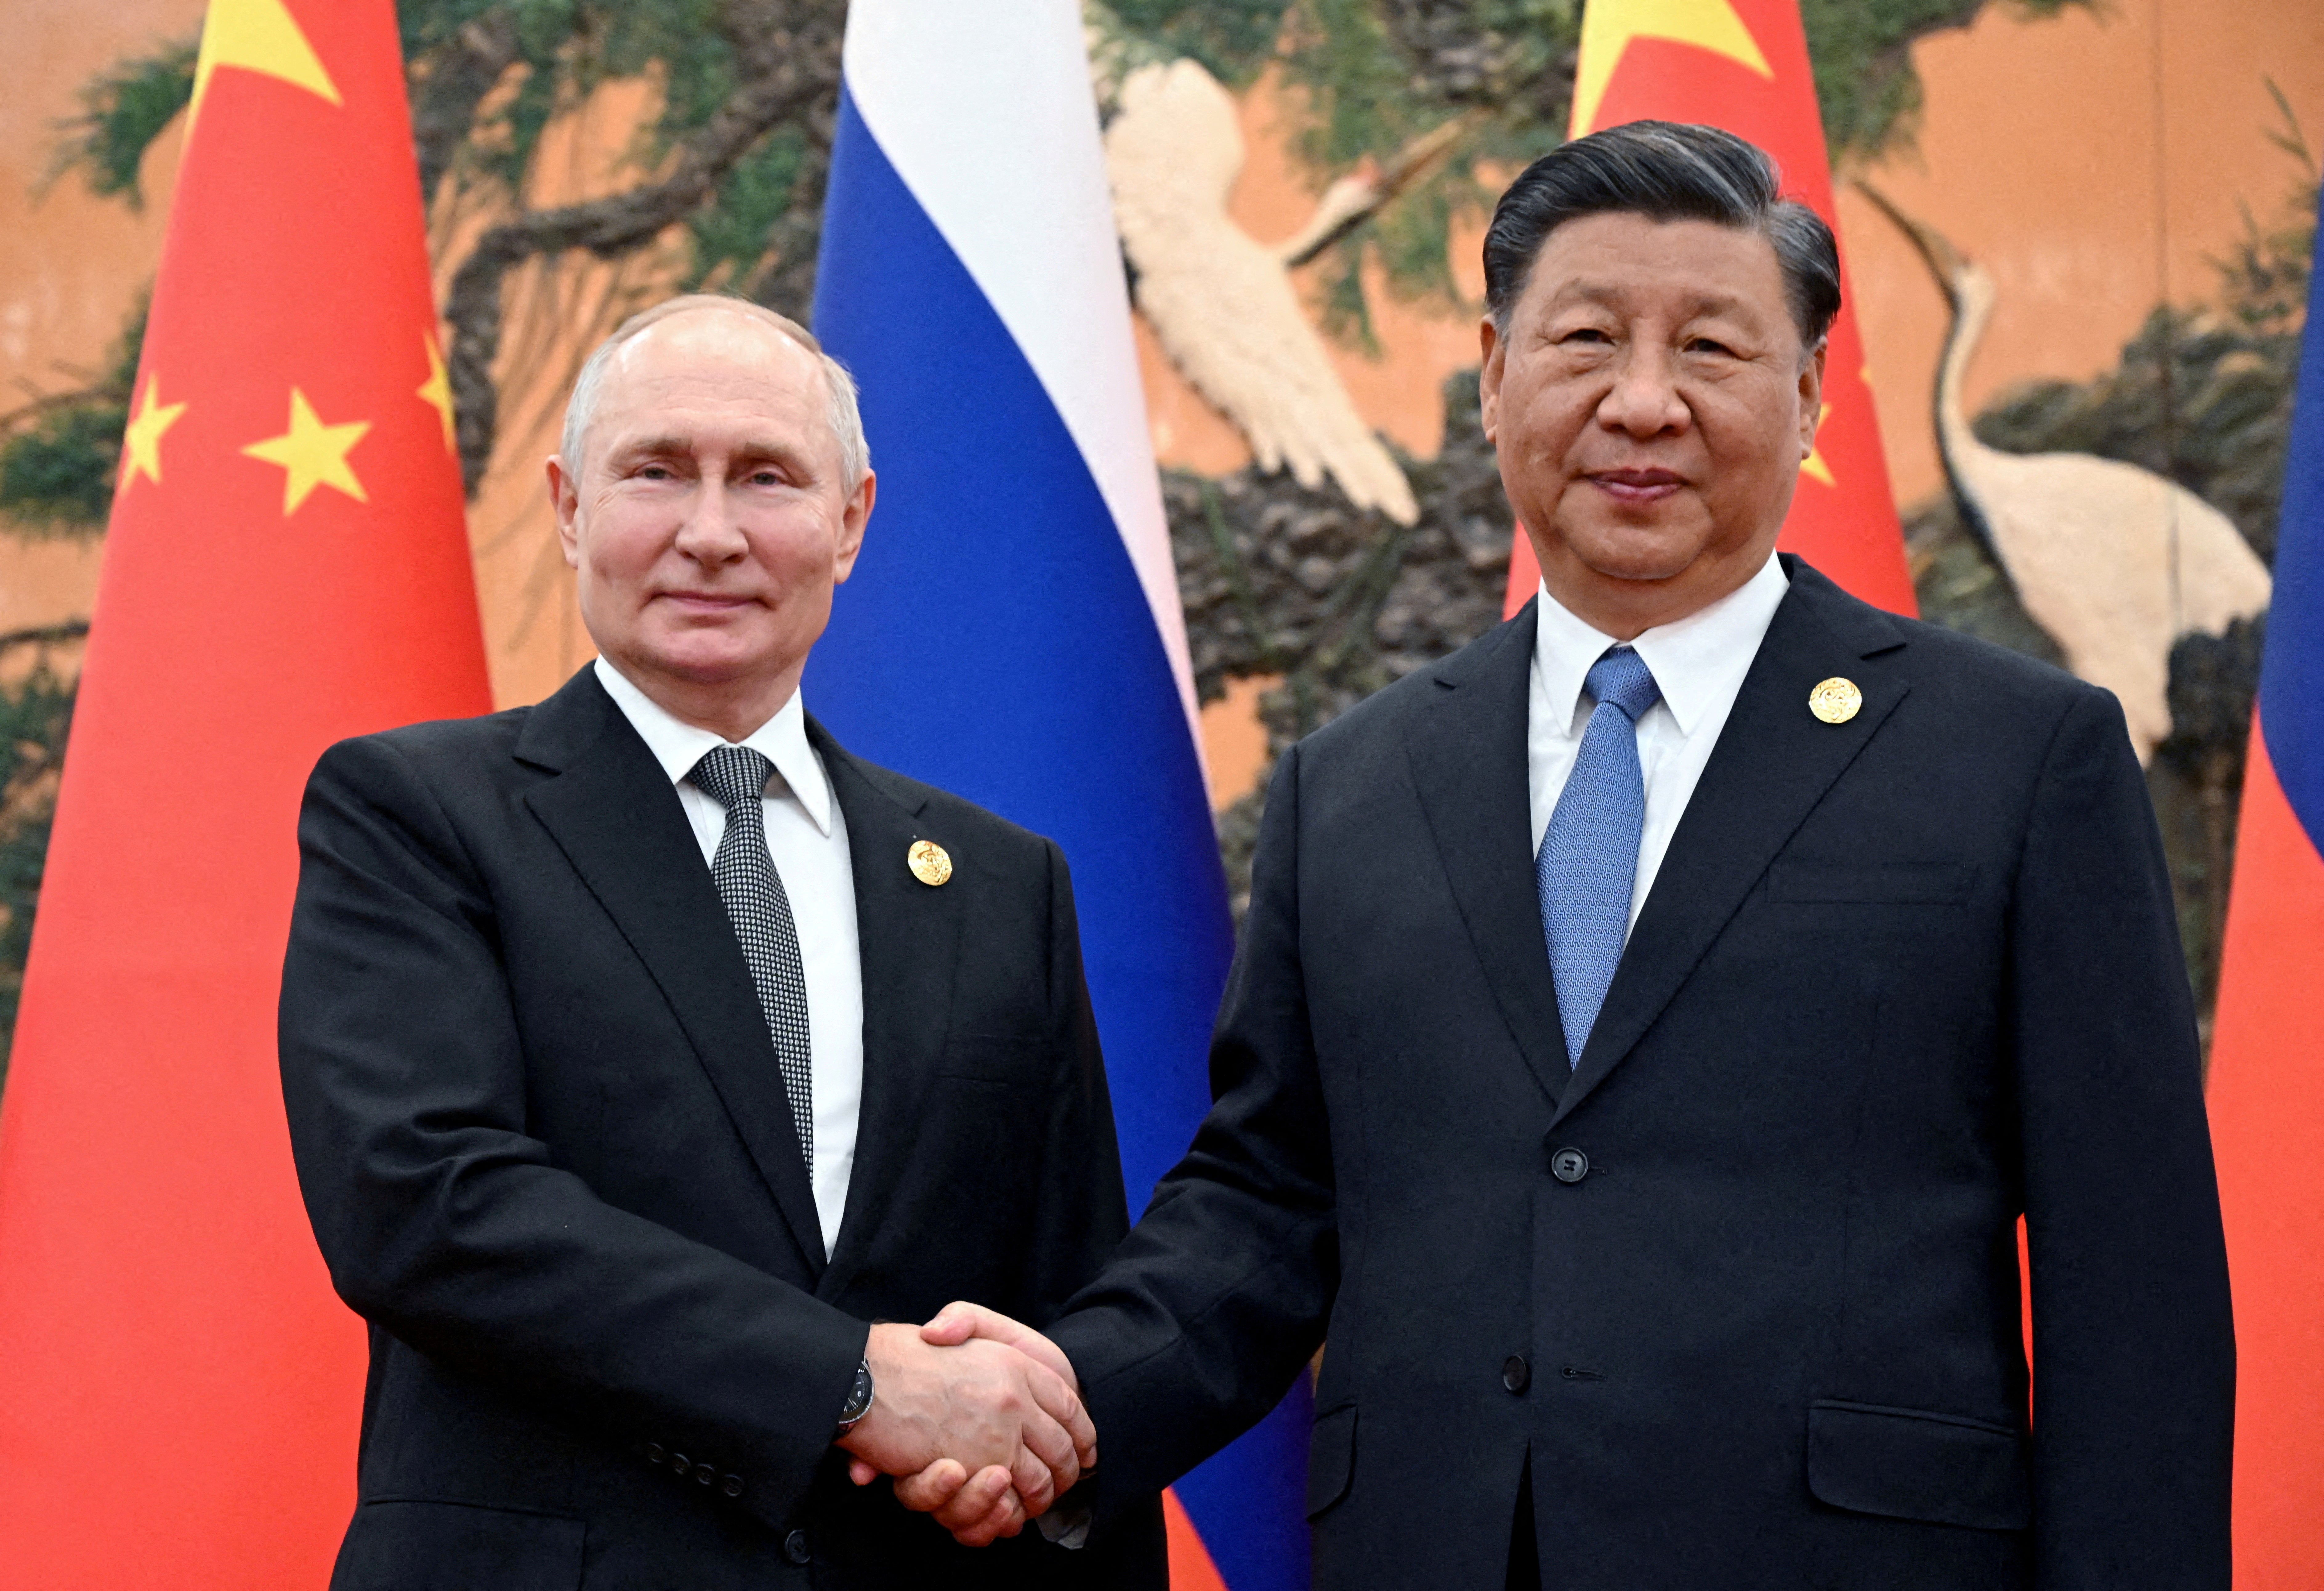 Russia and China have become increasingly close during Xi Jinping’s rule over China